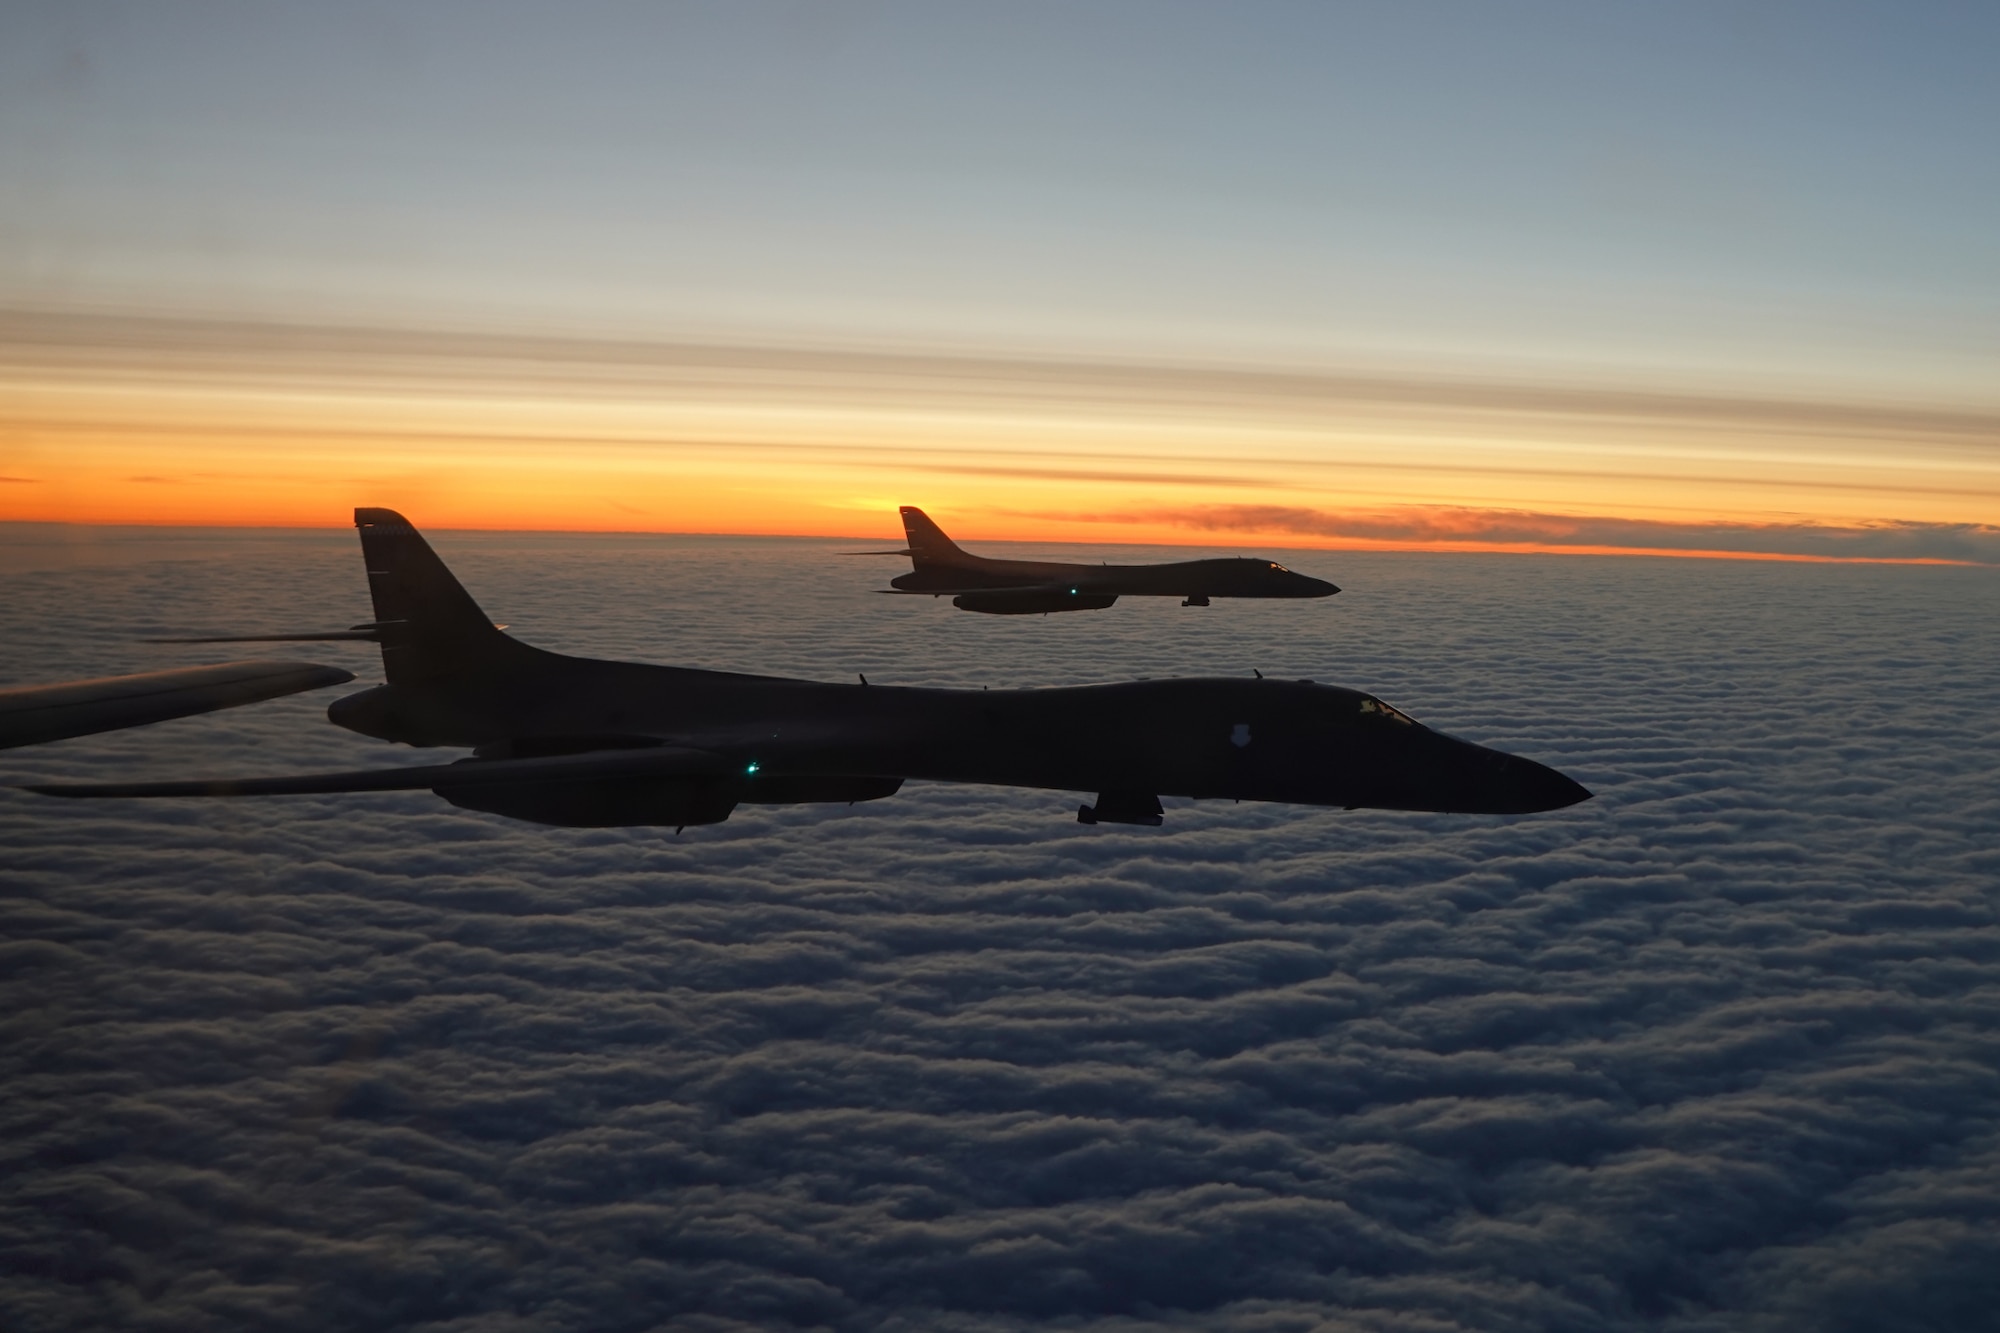 Photo of two B-1's flying over clouds